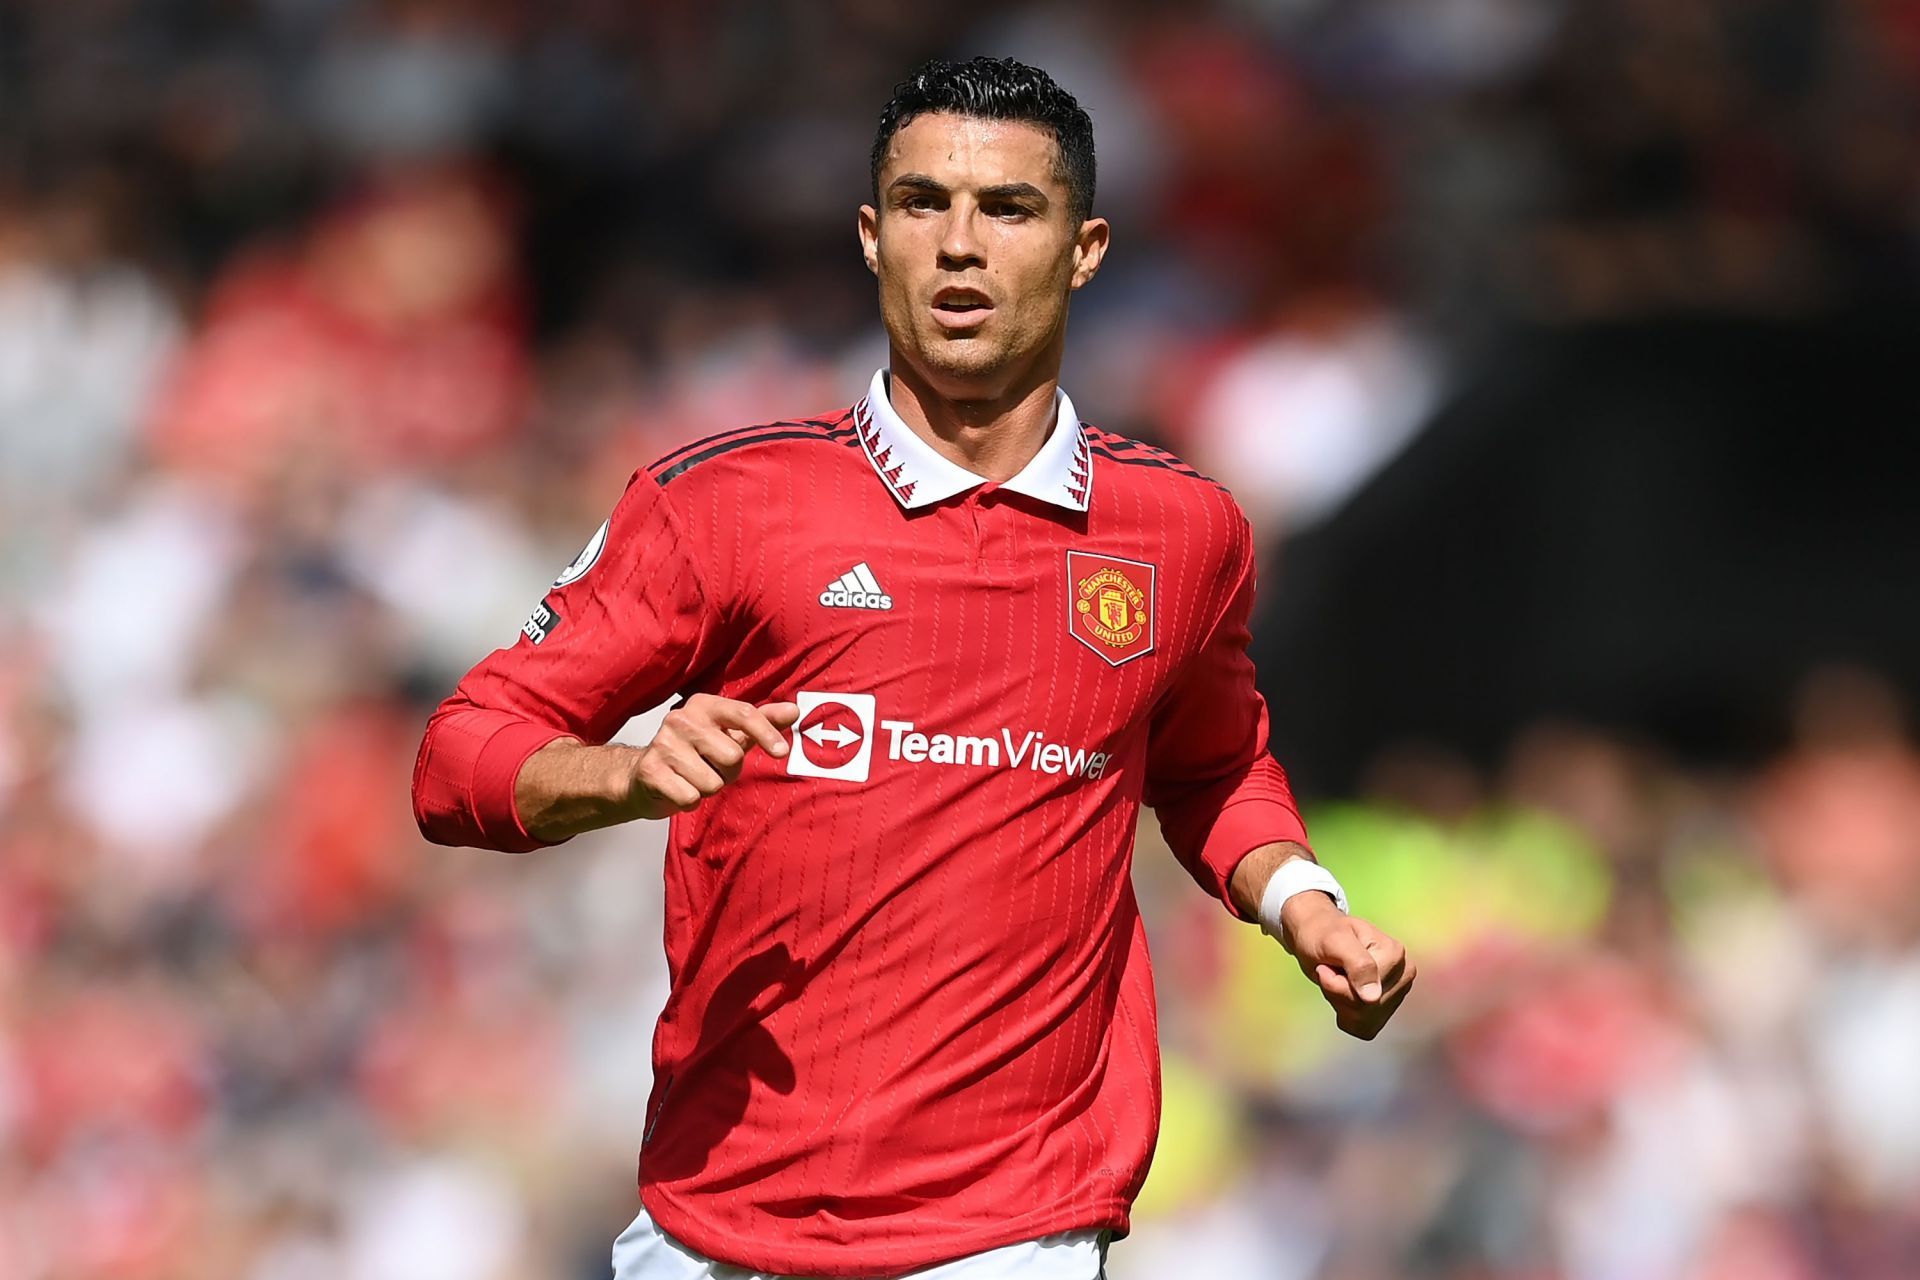 Ronaldo&#039;s future is still uncertain at Manchester United. (Photo by Michael Regan/Getty Images)